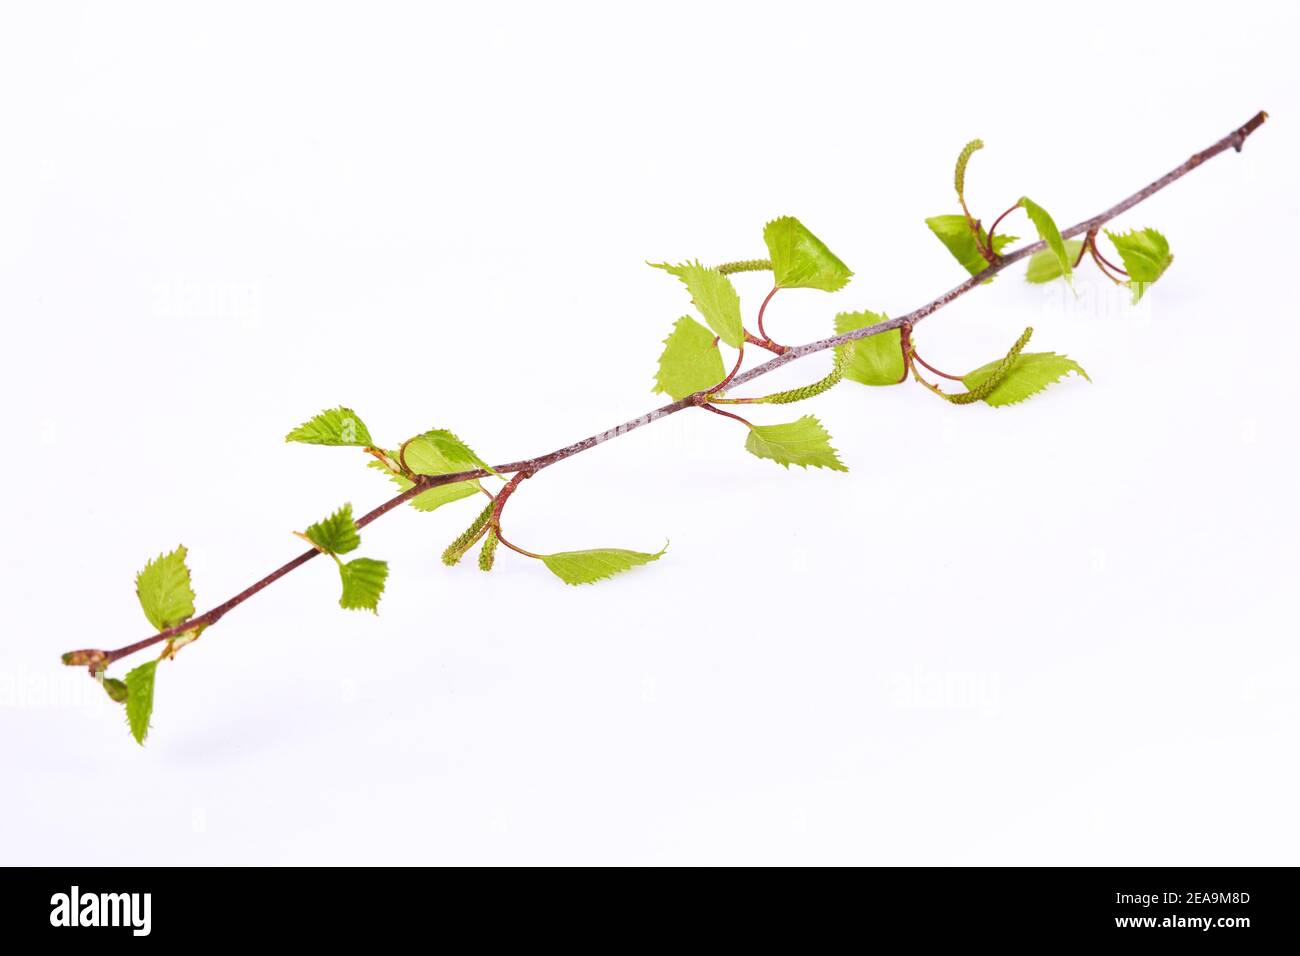 Young branch of birch with tiny catkin and small leaves in early spring isolated on a white background. Stock Photo